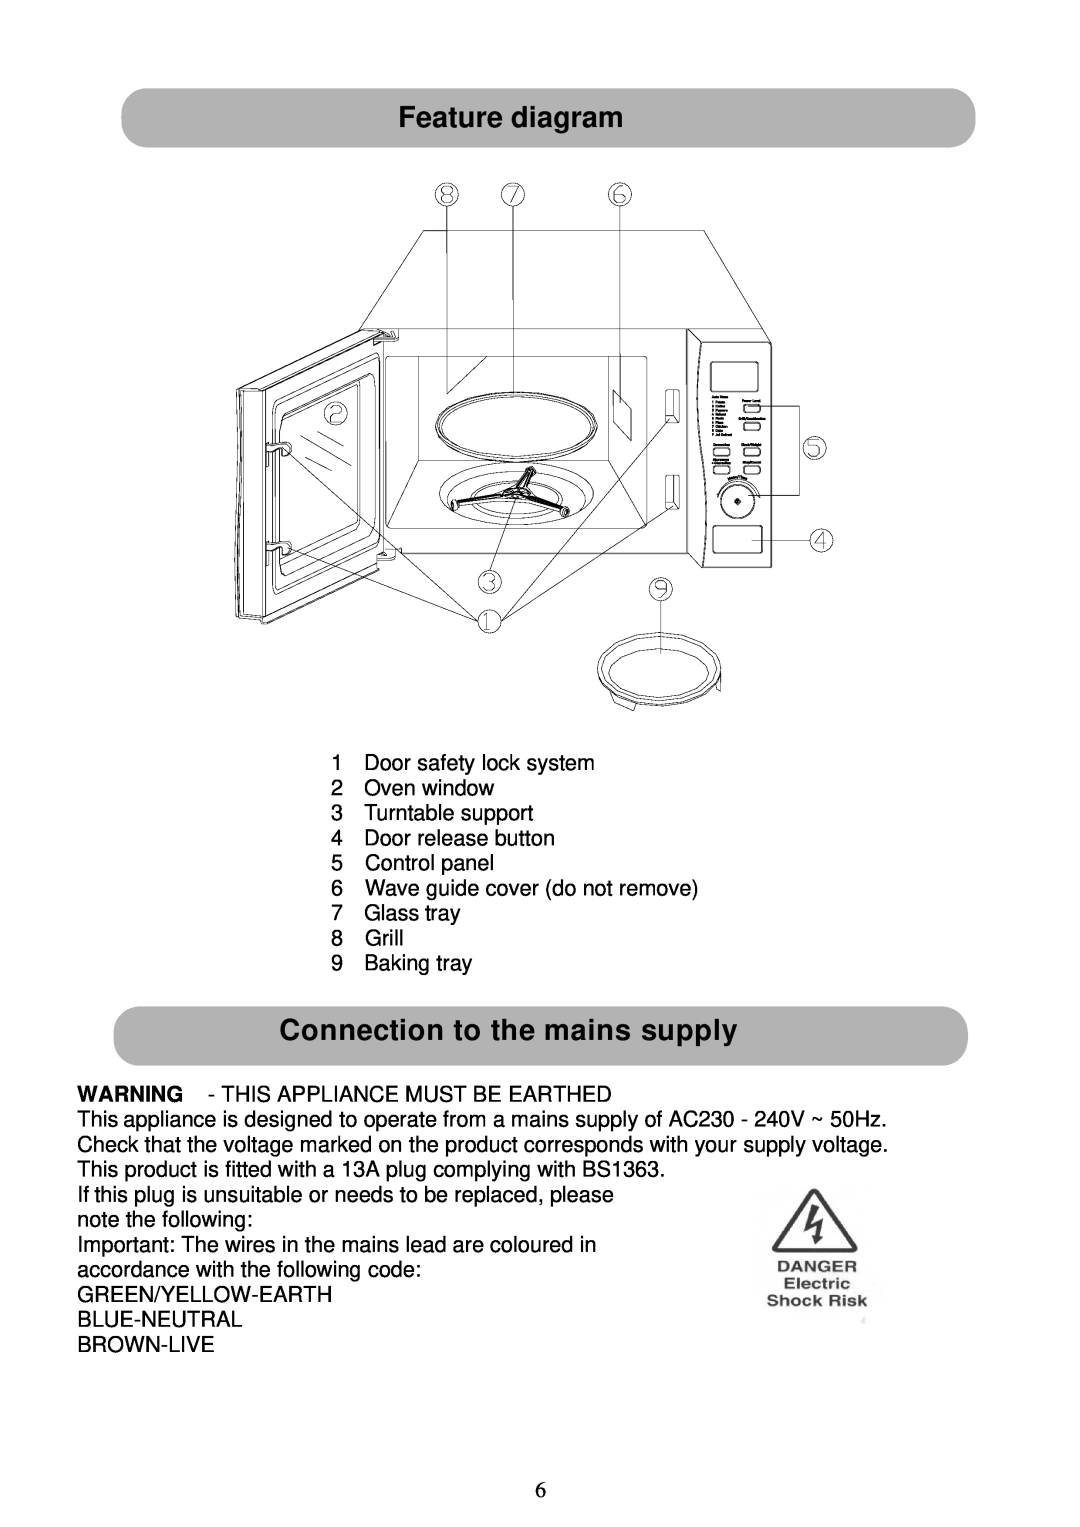 Russell Hobbs RHM2011 user manual Feature diagram, Connection to the mains supply 